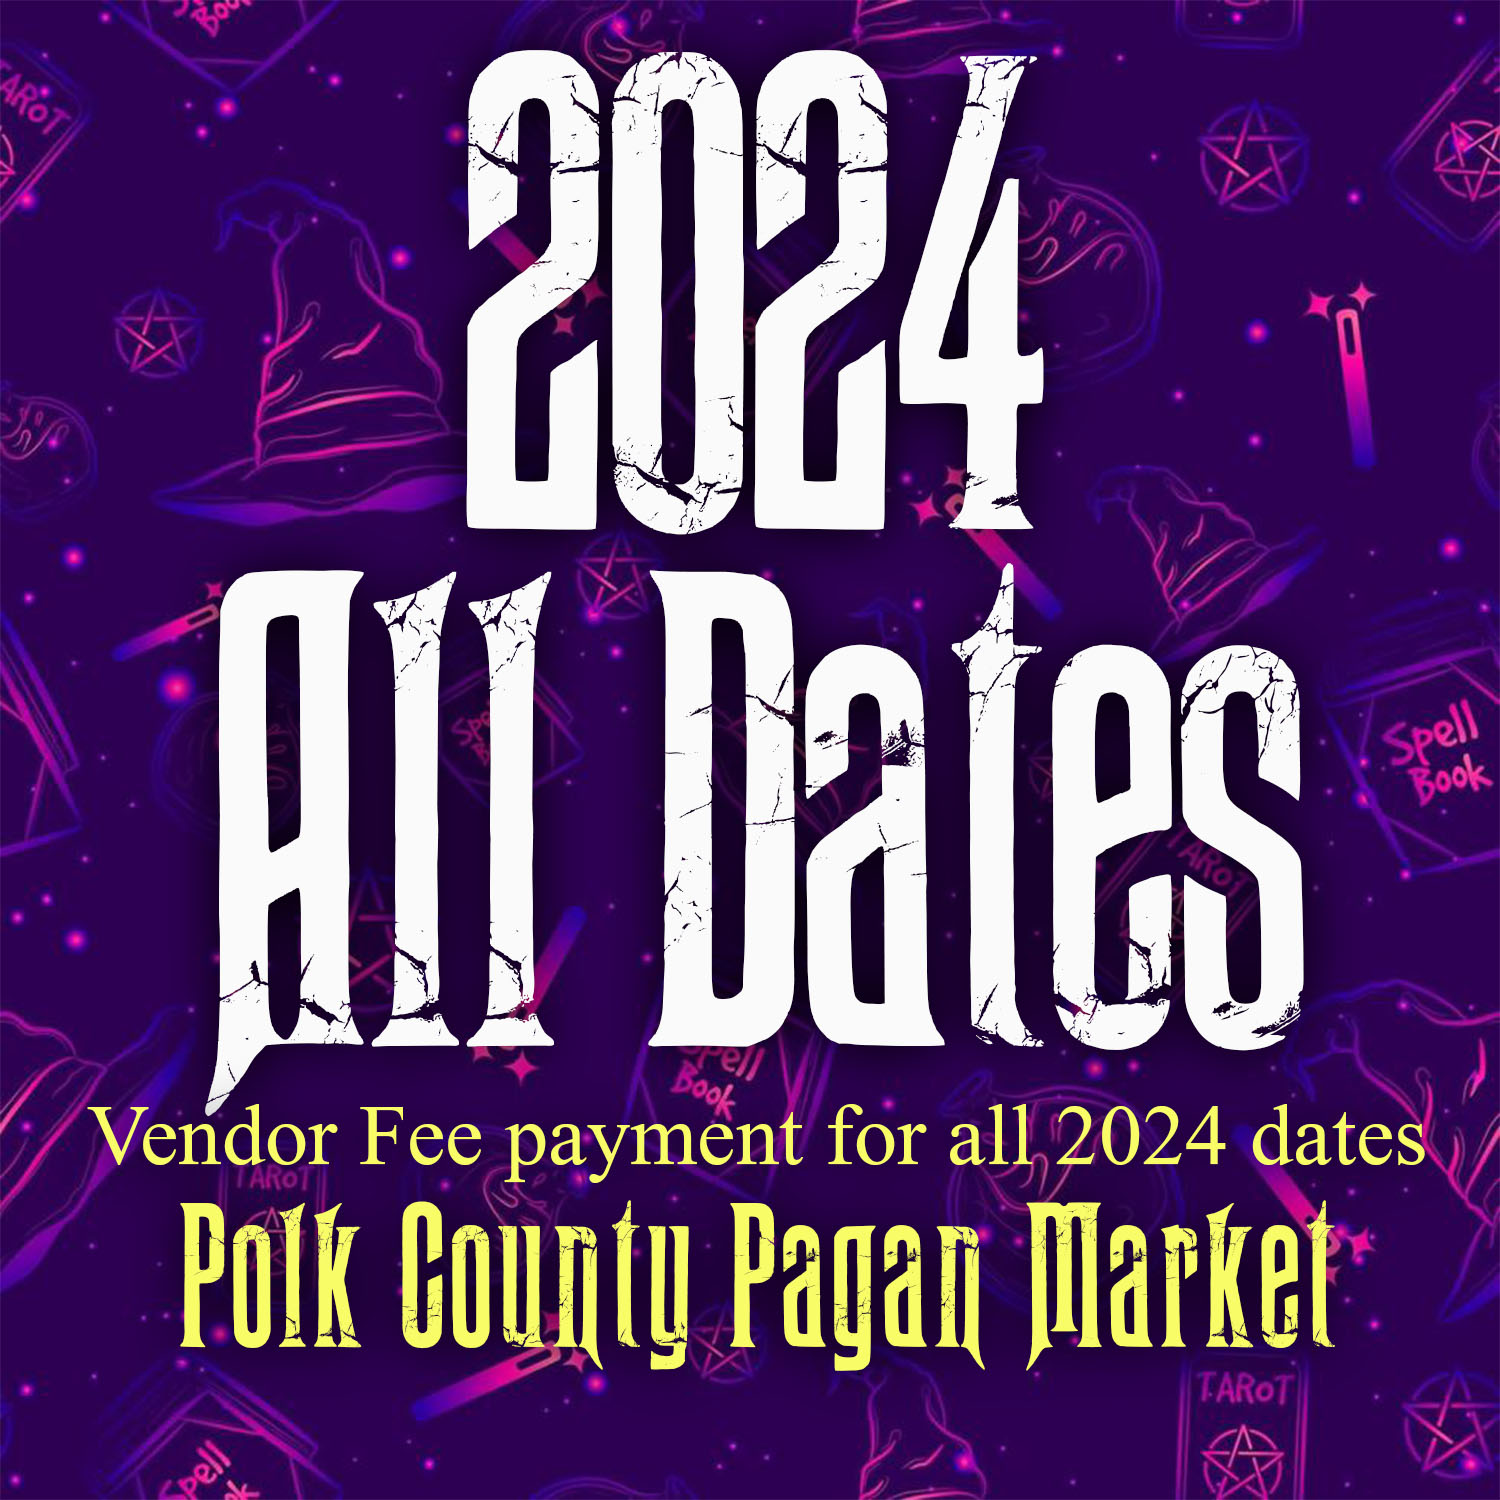 2024 all Dates Vendor Fee Booth reservation Polk County Pagan